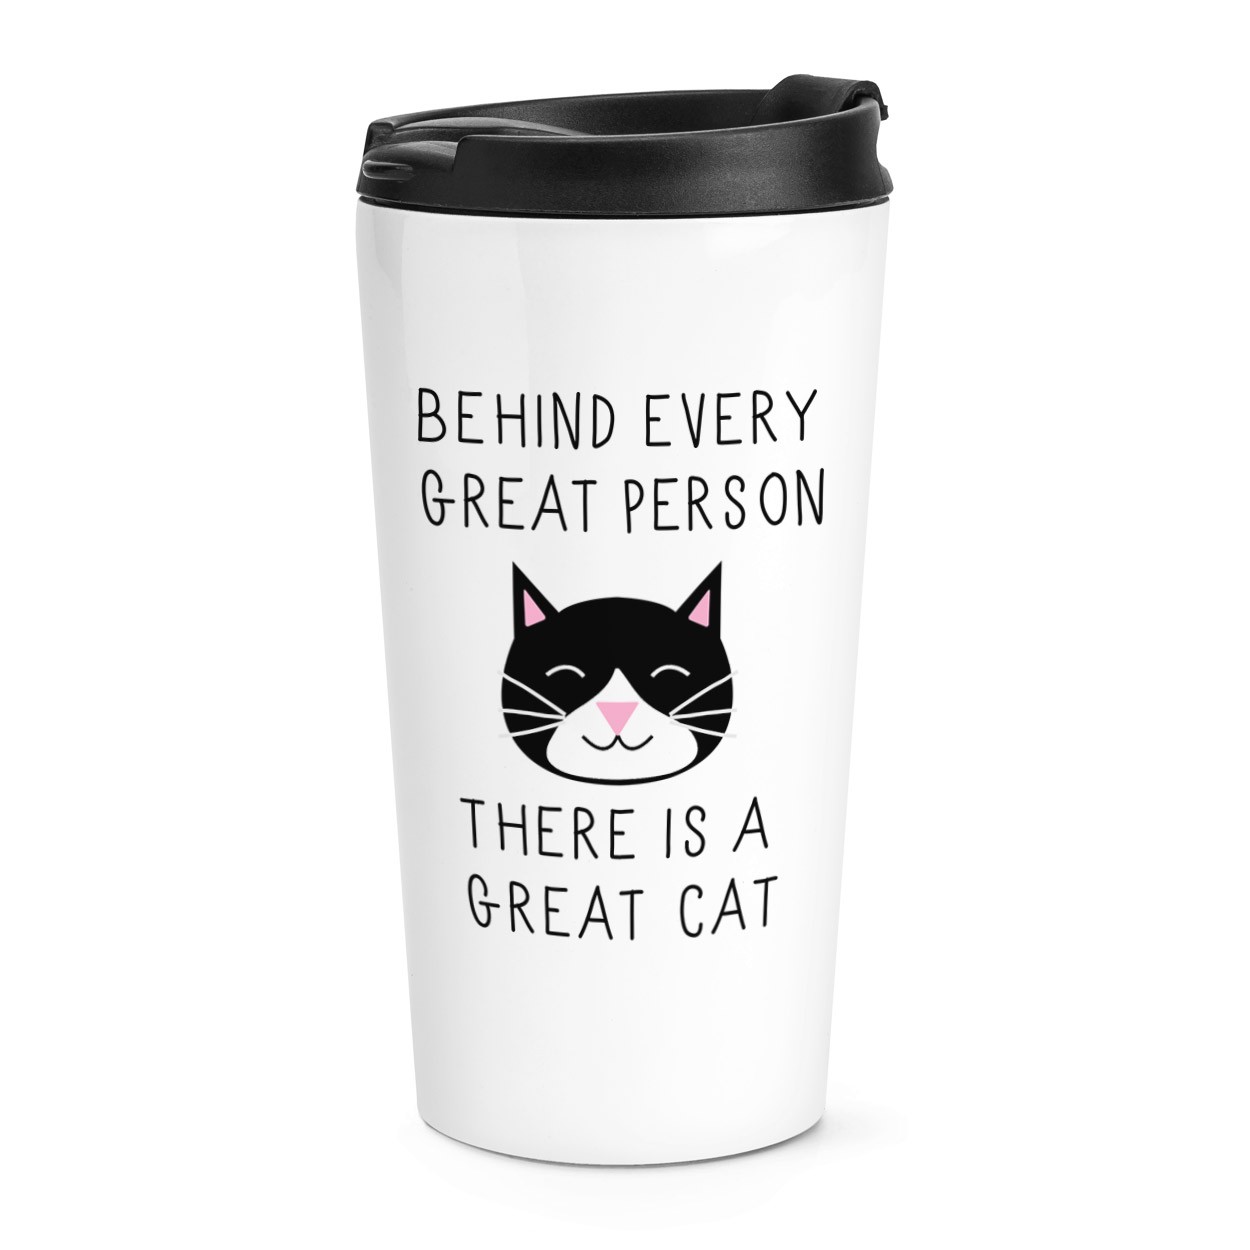 Behind Every Great Person Is A Great Cat Travel Mug Cup